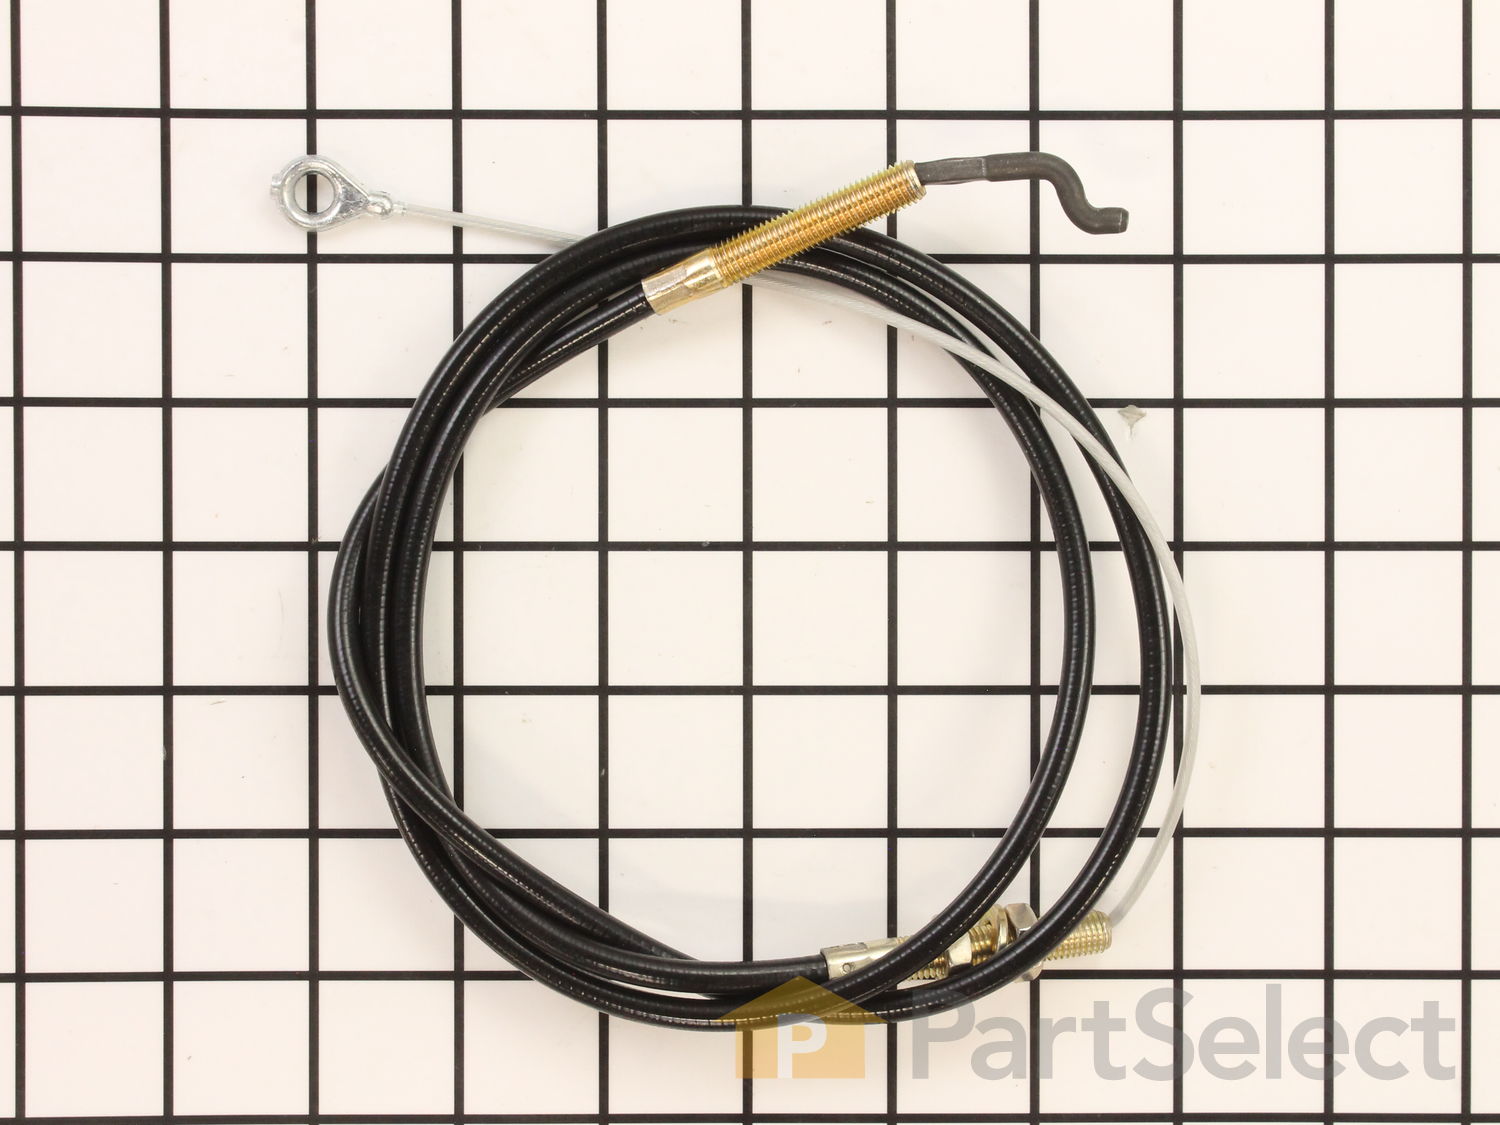 946-0535 MTD Control Clutch Cable 746-0535 21406S 215-403-000 405-081 219-406-10 